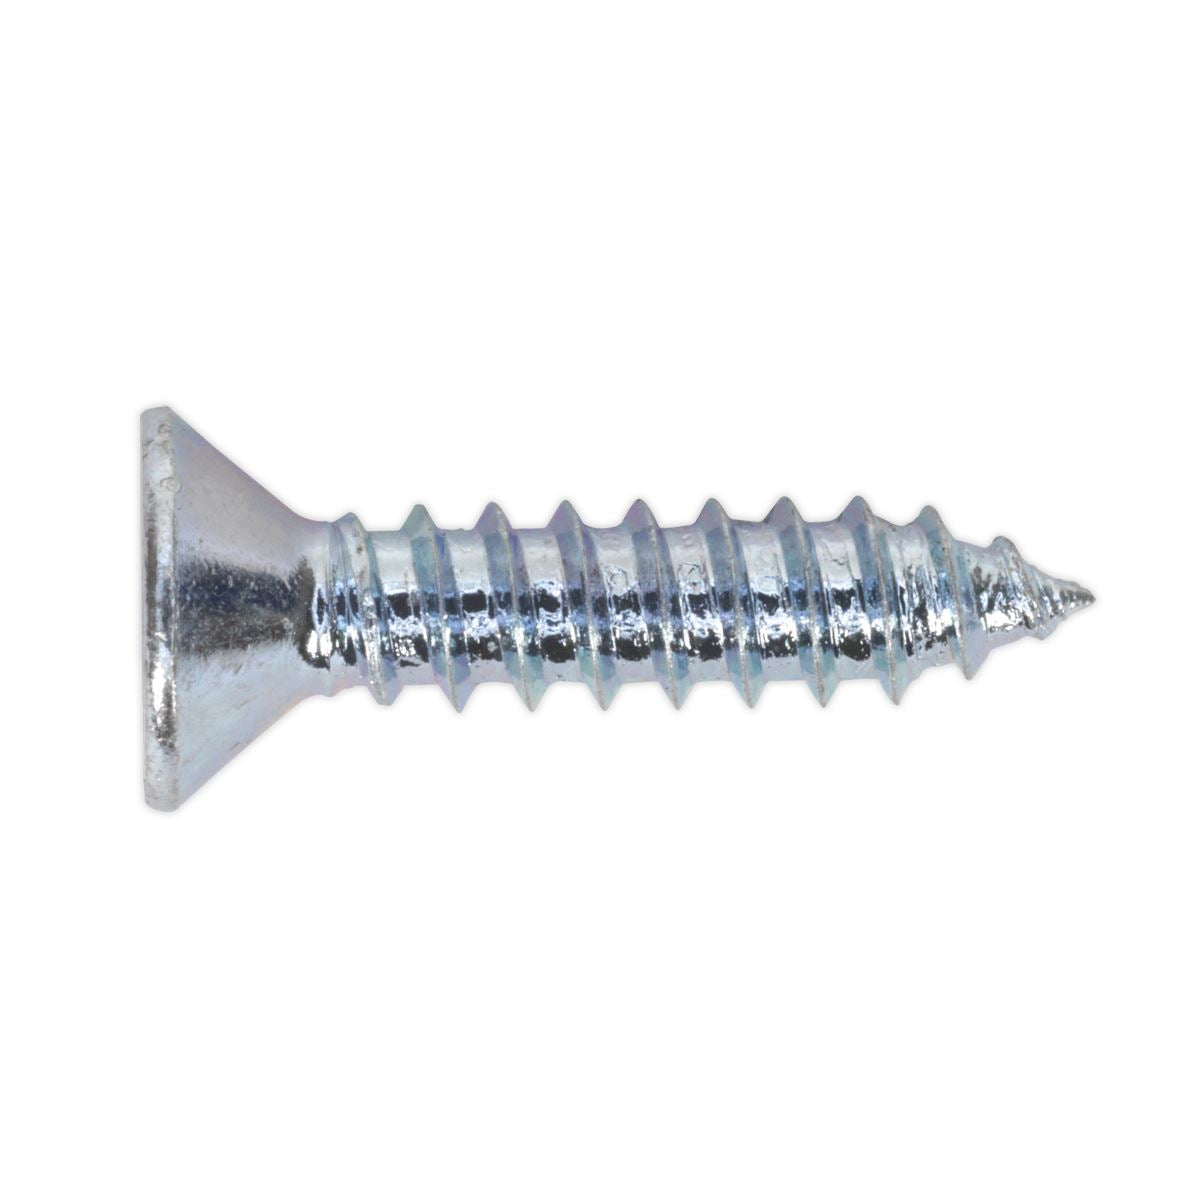 Sealey Self Tapping Screw 4.2 x 19mm Countersunk Pozi Pack of 100